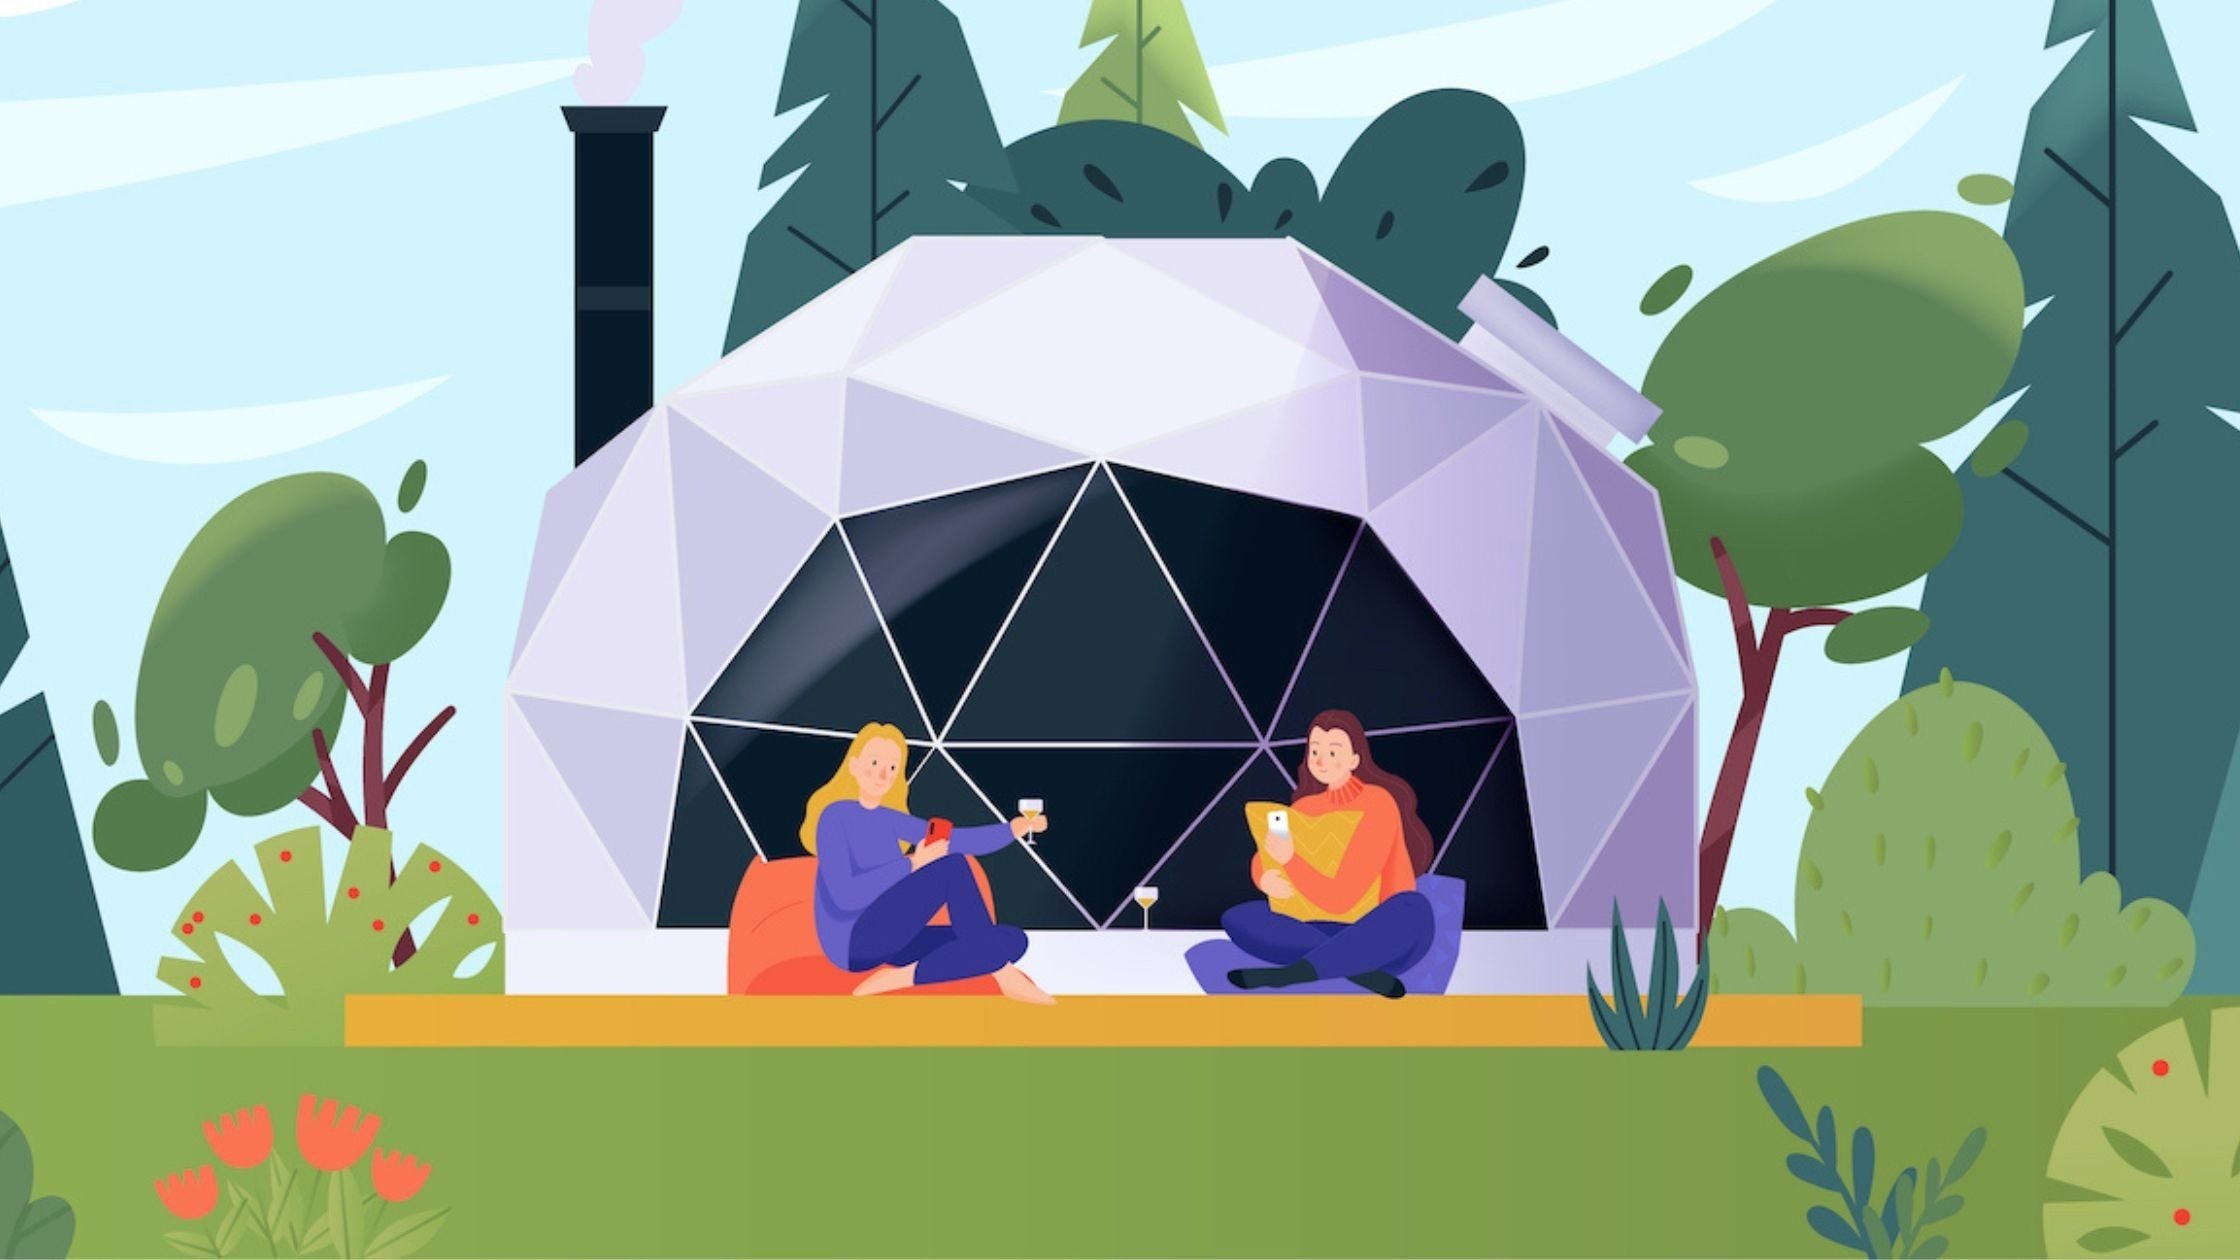 an illustration of two people sitting in front of a dome